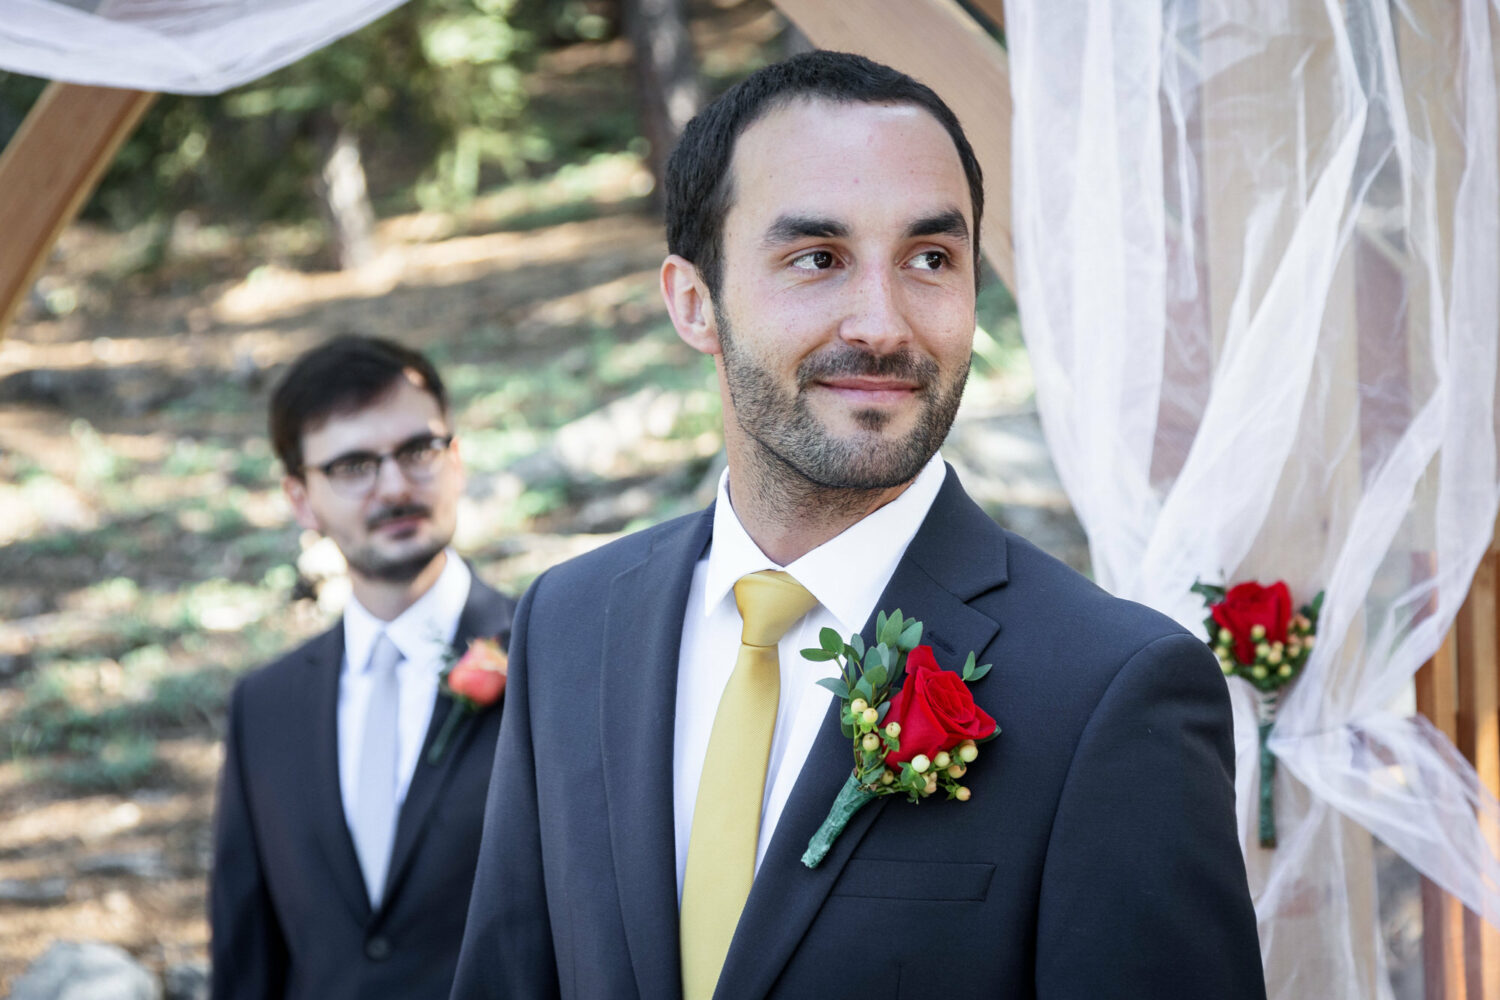 The groom waits for his bride, wearing a black suit with a gold tie and a large red rose bouttonière.